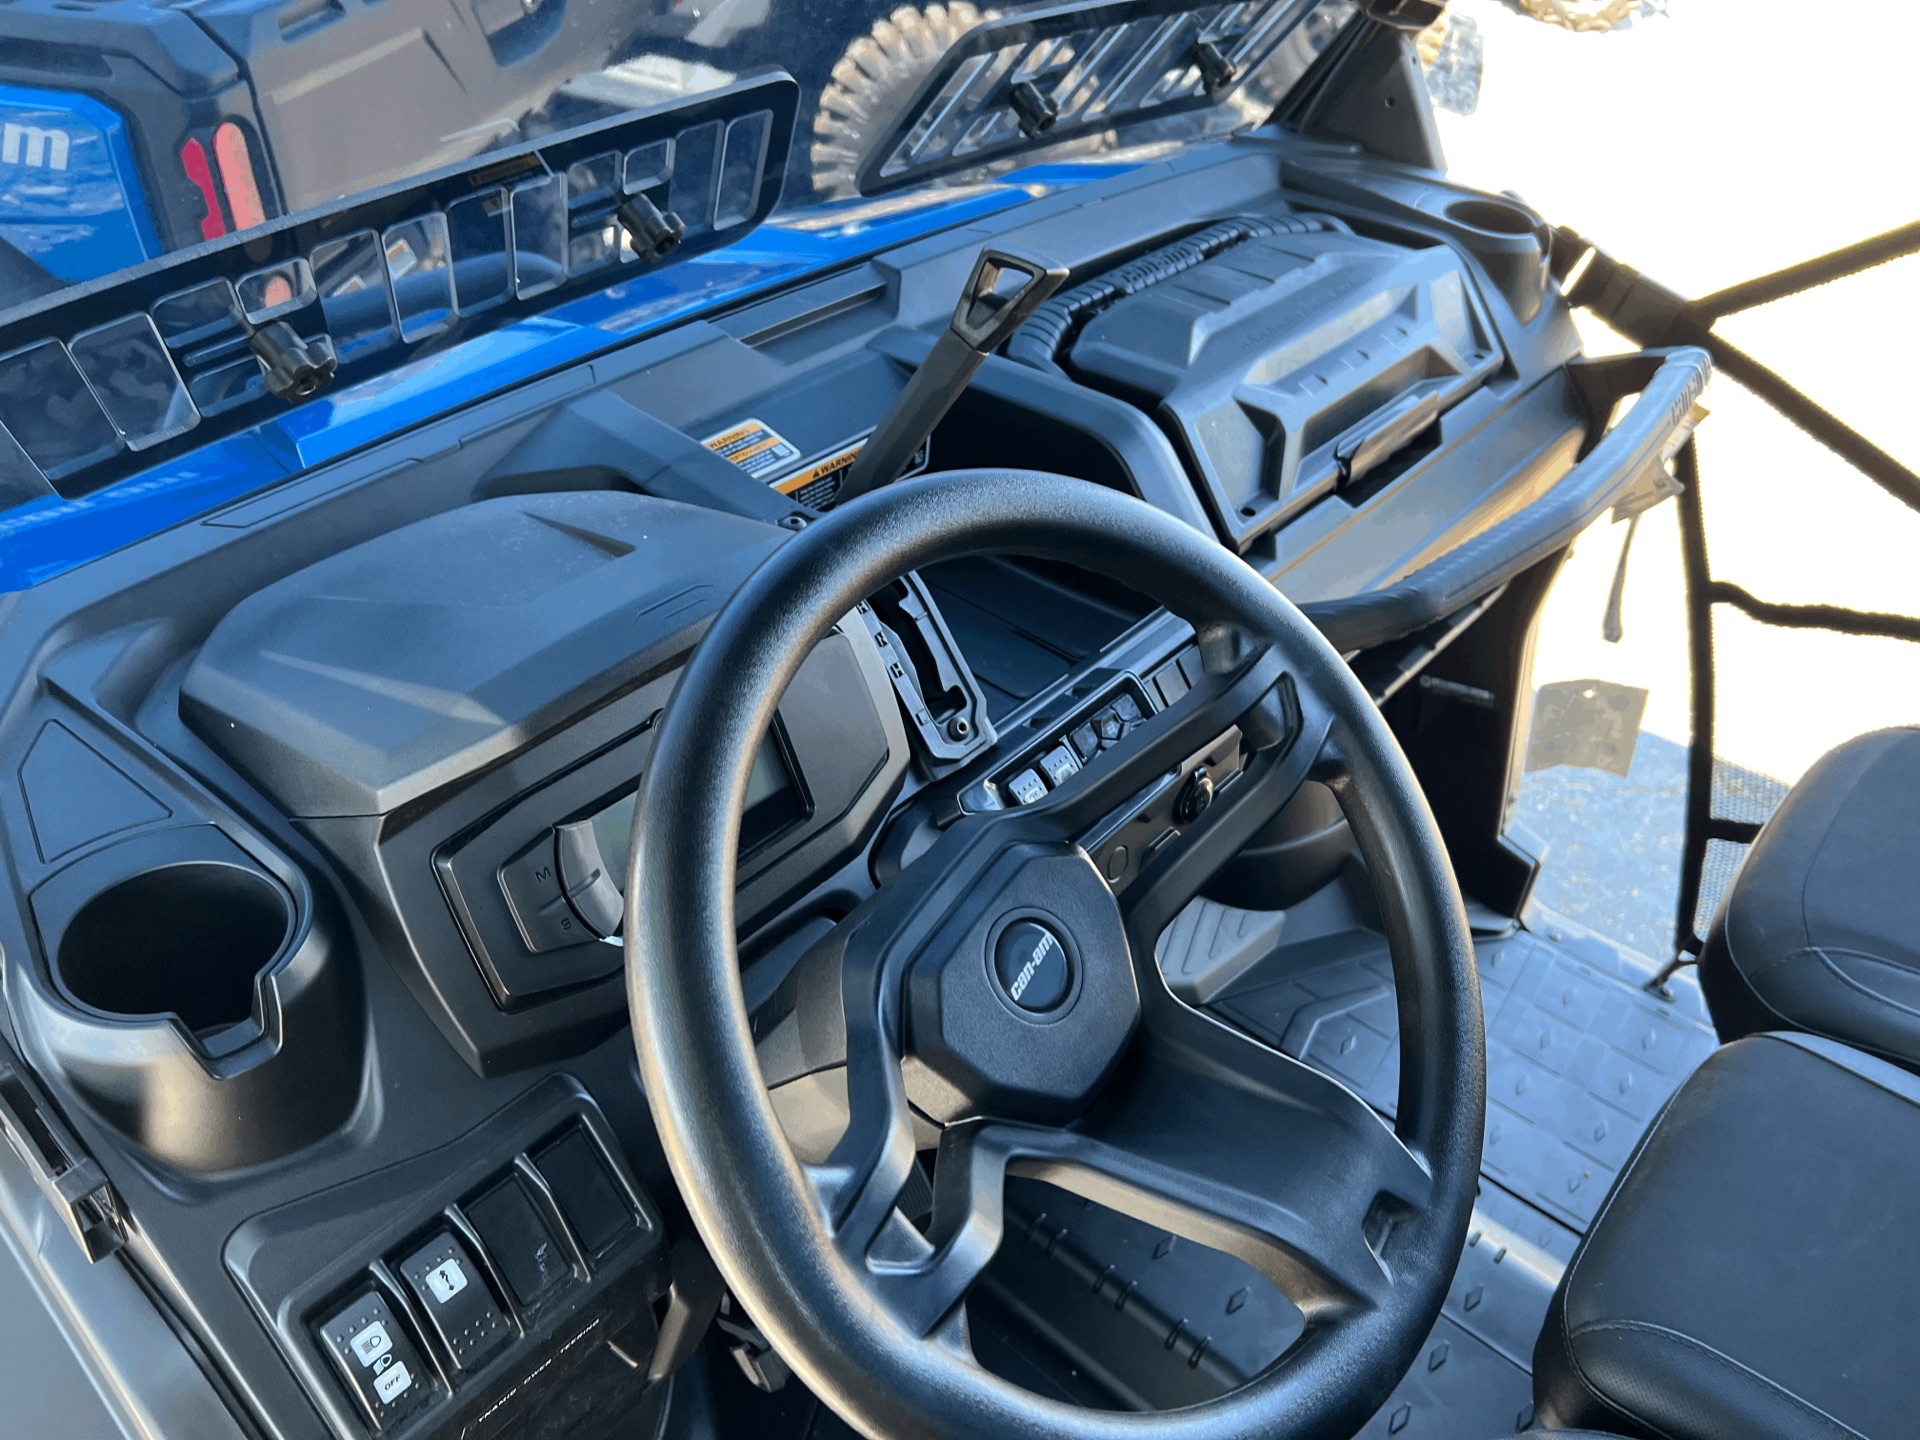 2023 Can-Am Defender XT HD10 in Dyersburg, Tennessee - Photo 22